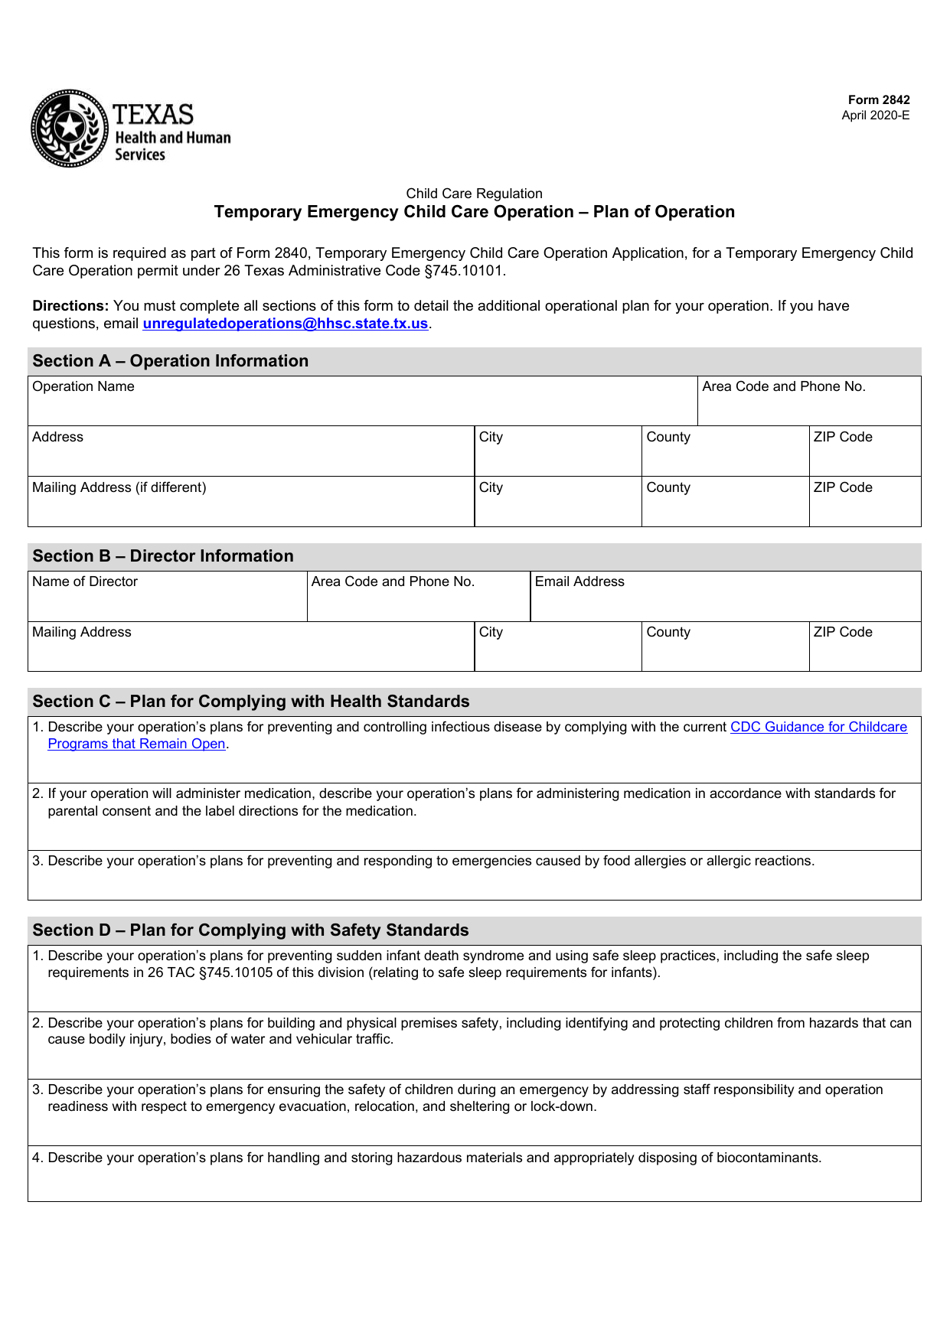 Form 2842 Temporary Emergency Child Care Operation - Plan of Operation - Texas, Page 1